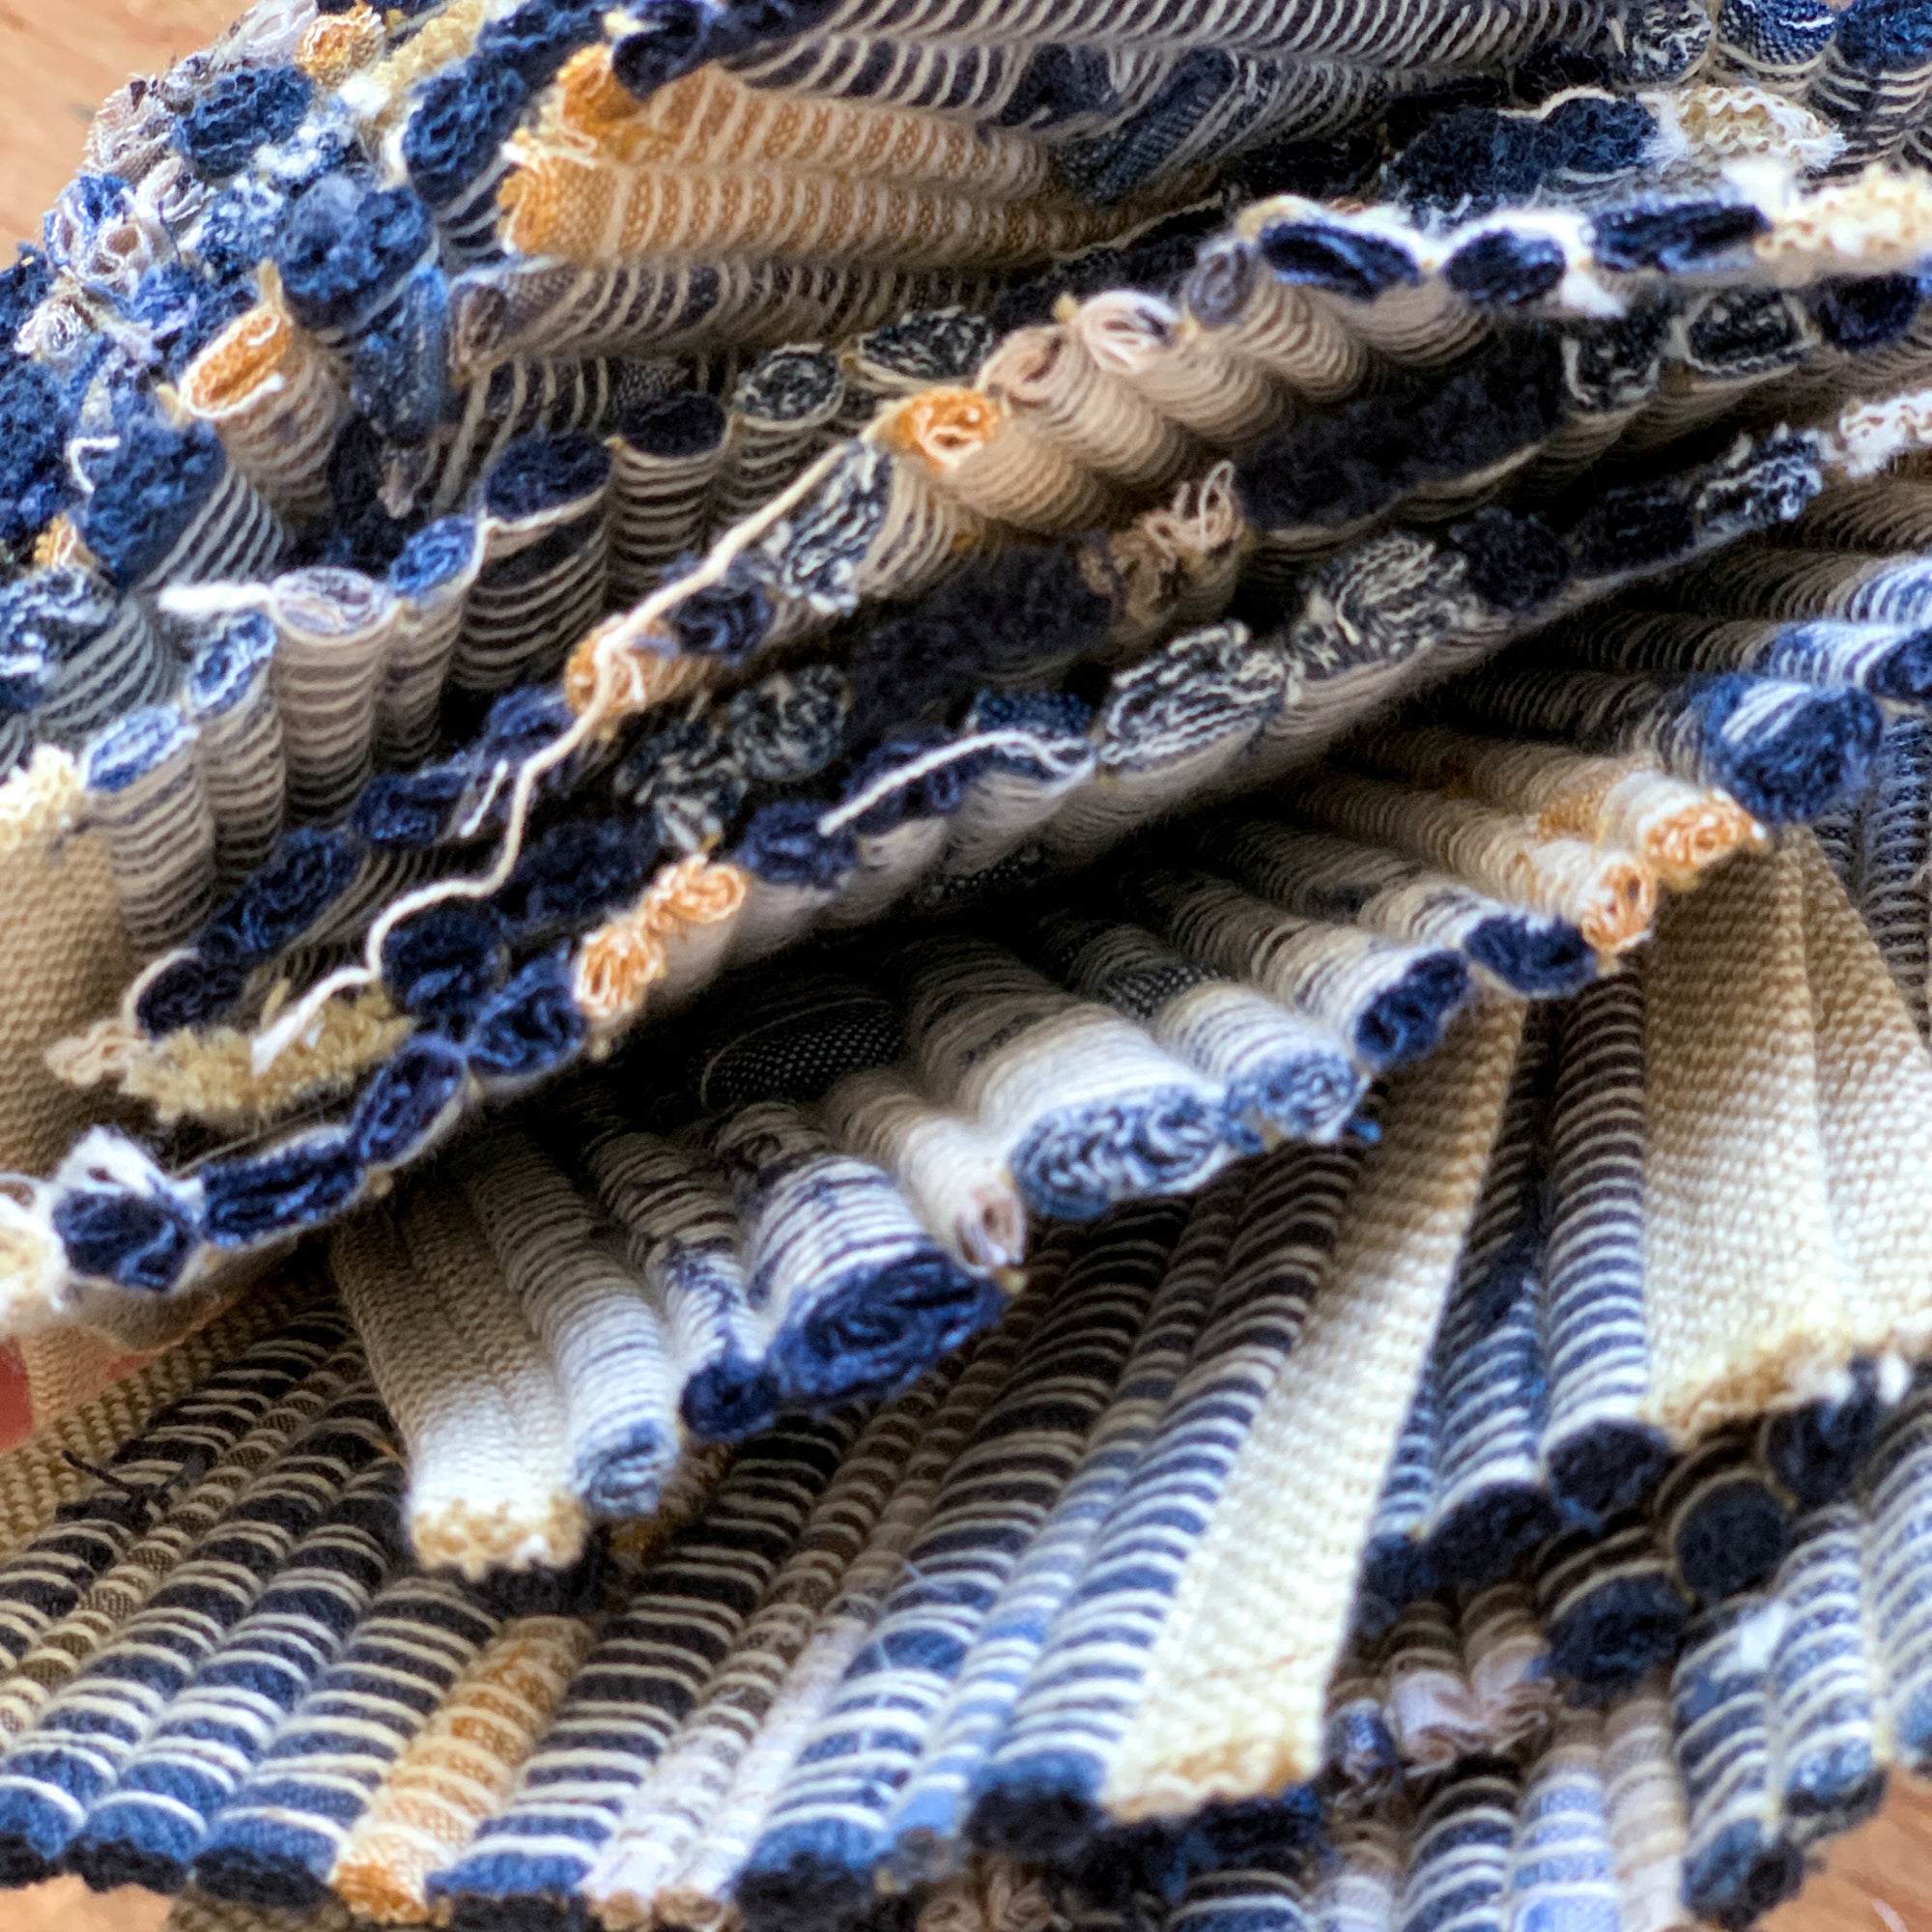 A Tactile Notion: Handwoven samples and lino print by Kim McCollum and Brianna Tosswill